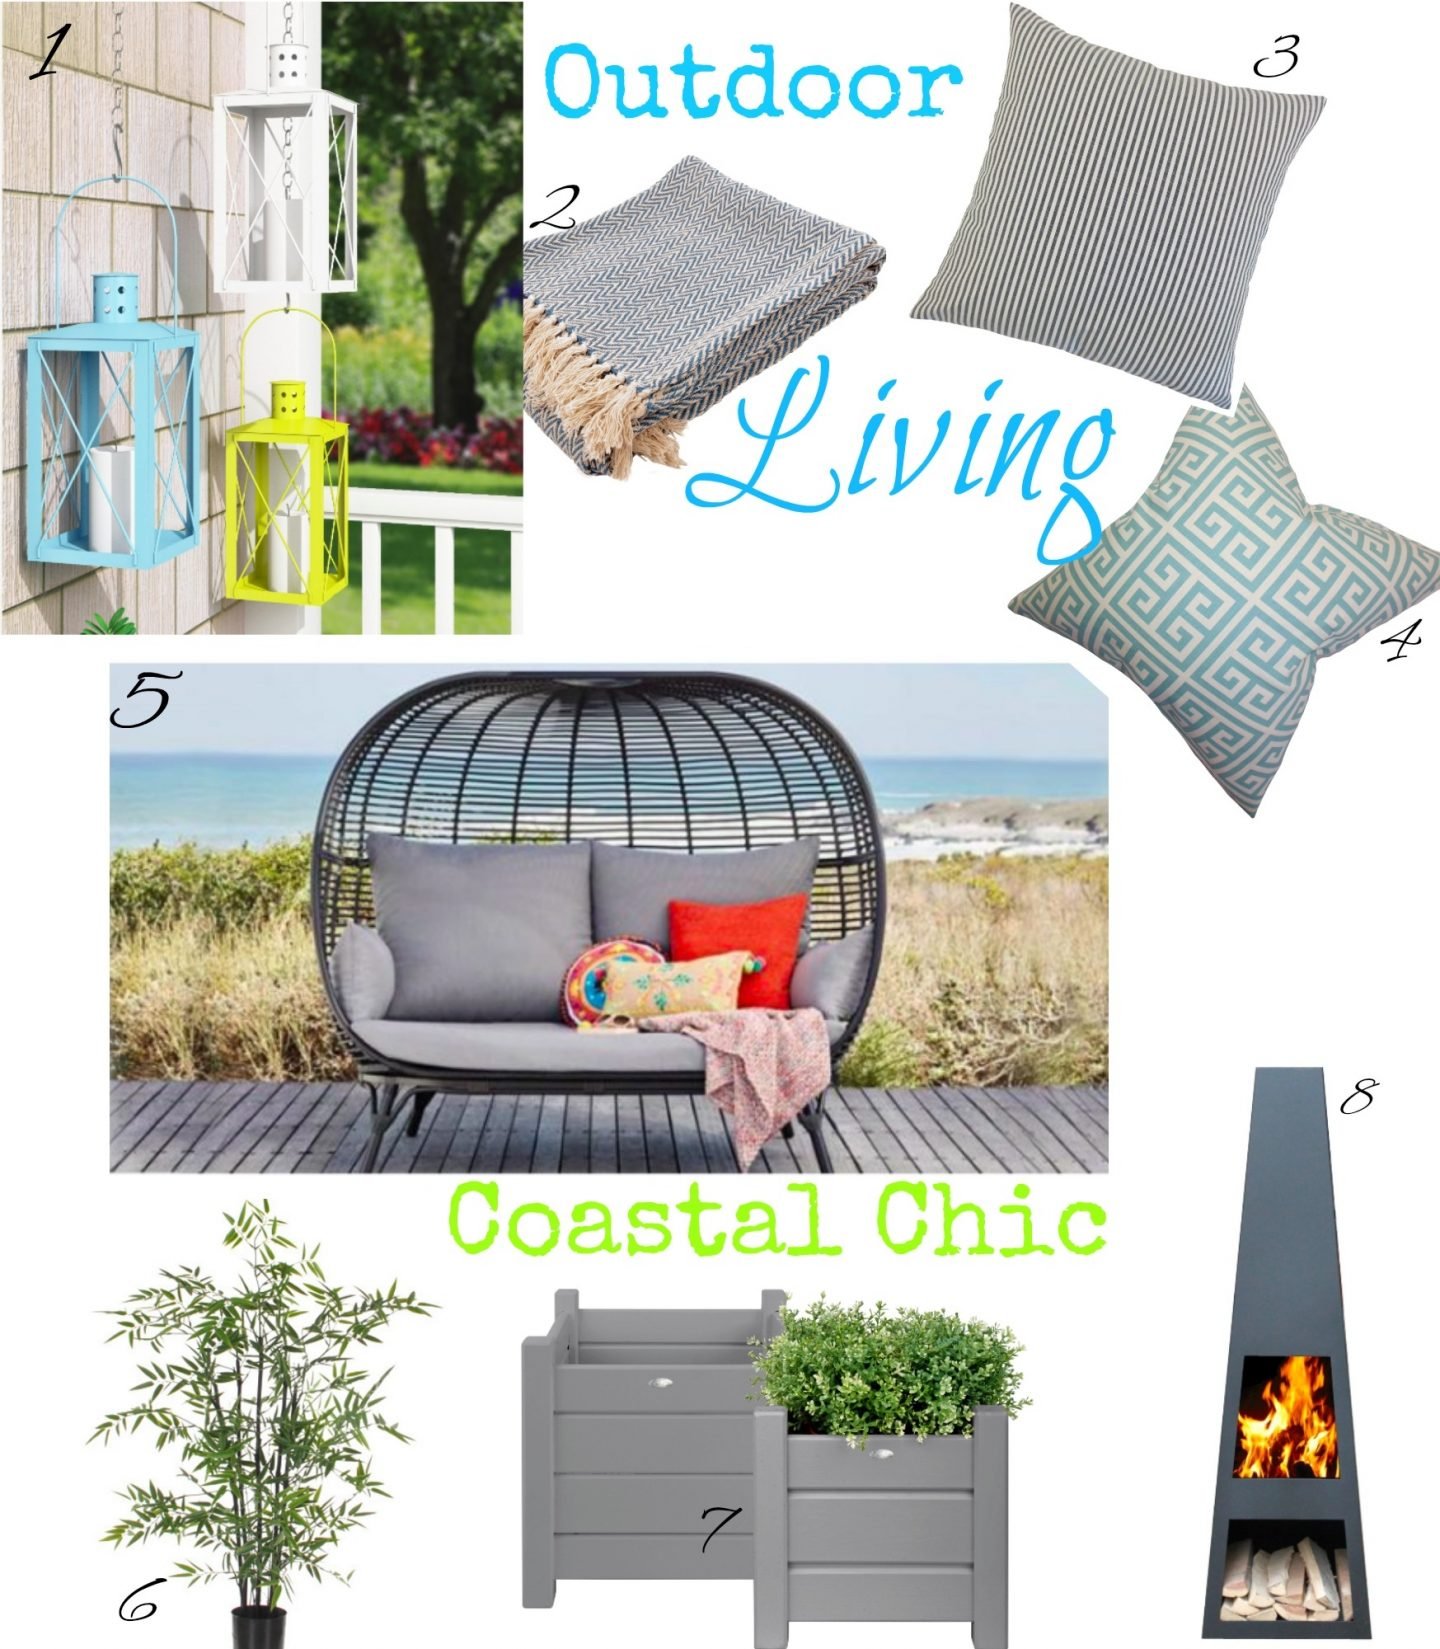 Bringing A Little Coastal Chic Style Garden Style To The Countryside www.extraordinarychaos.com